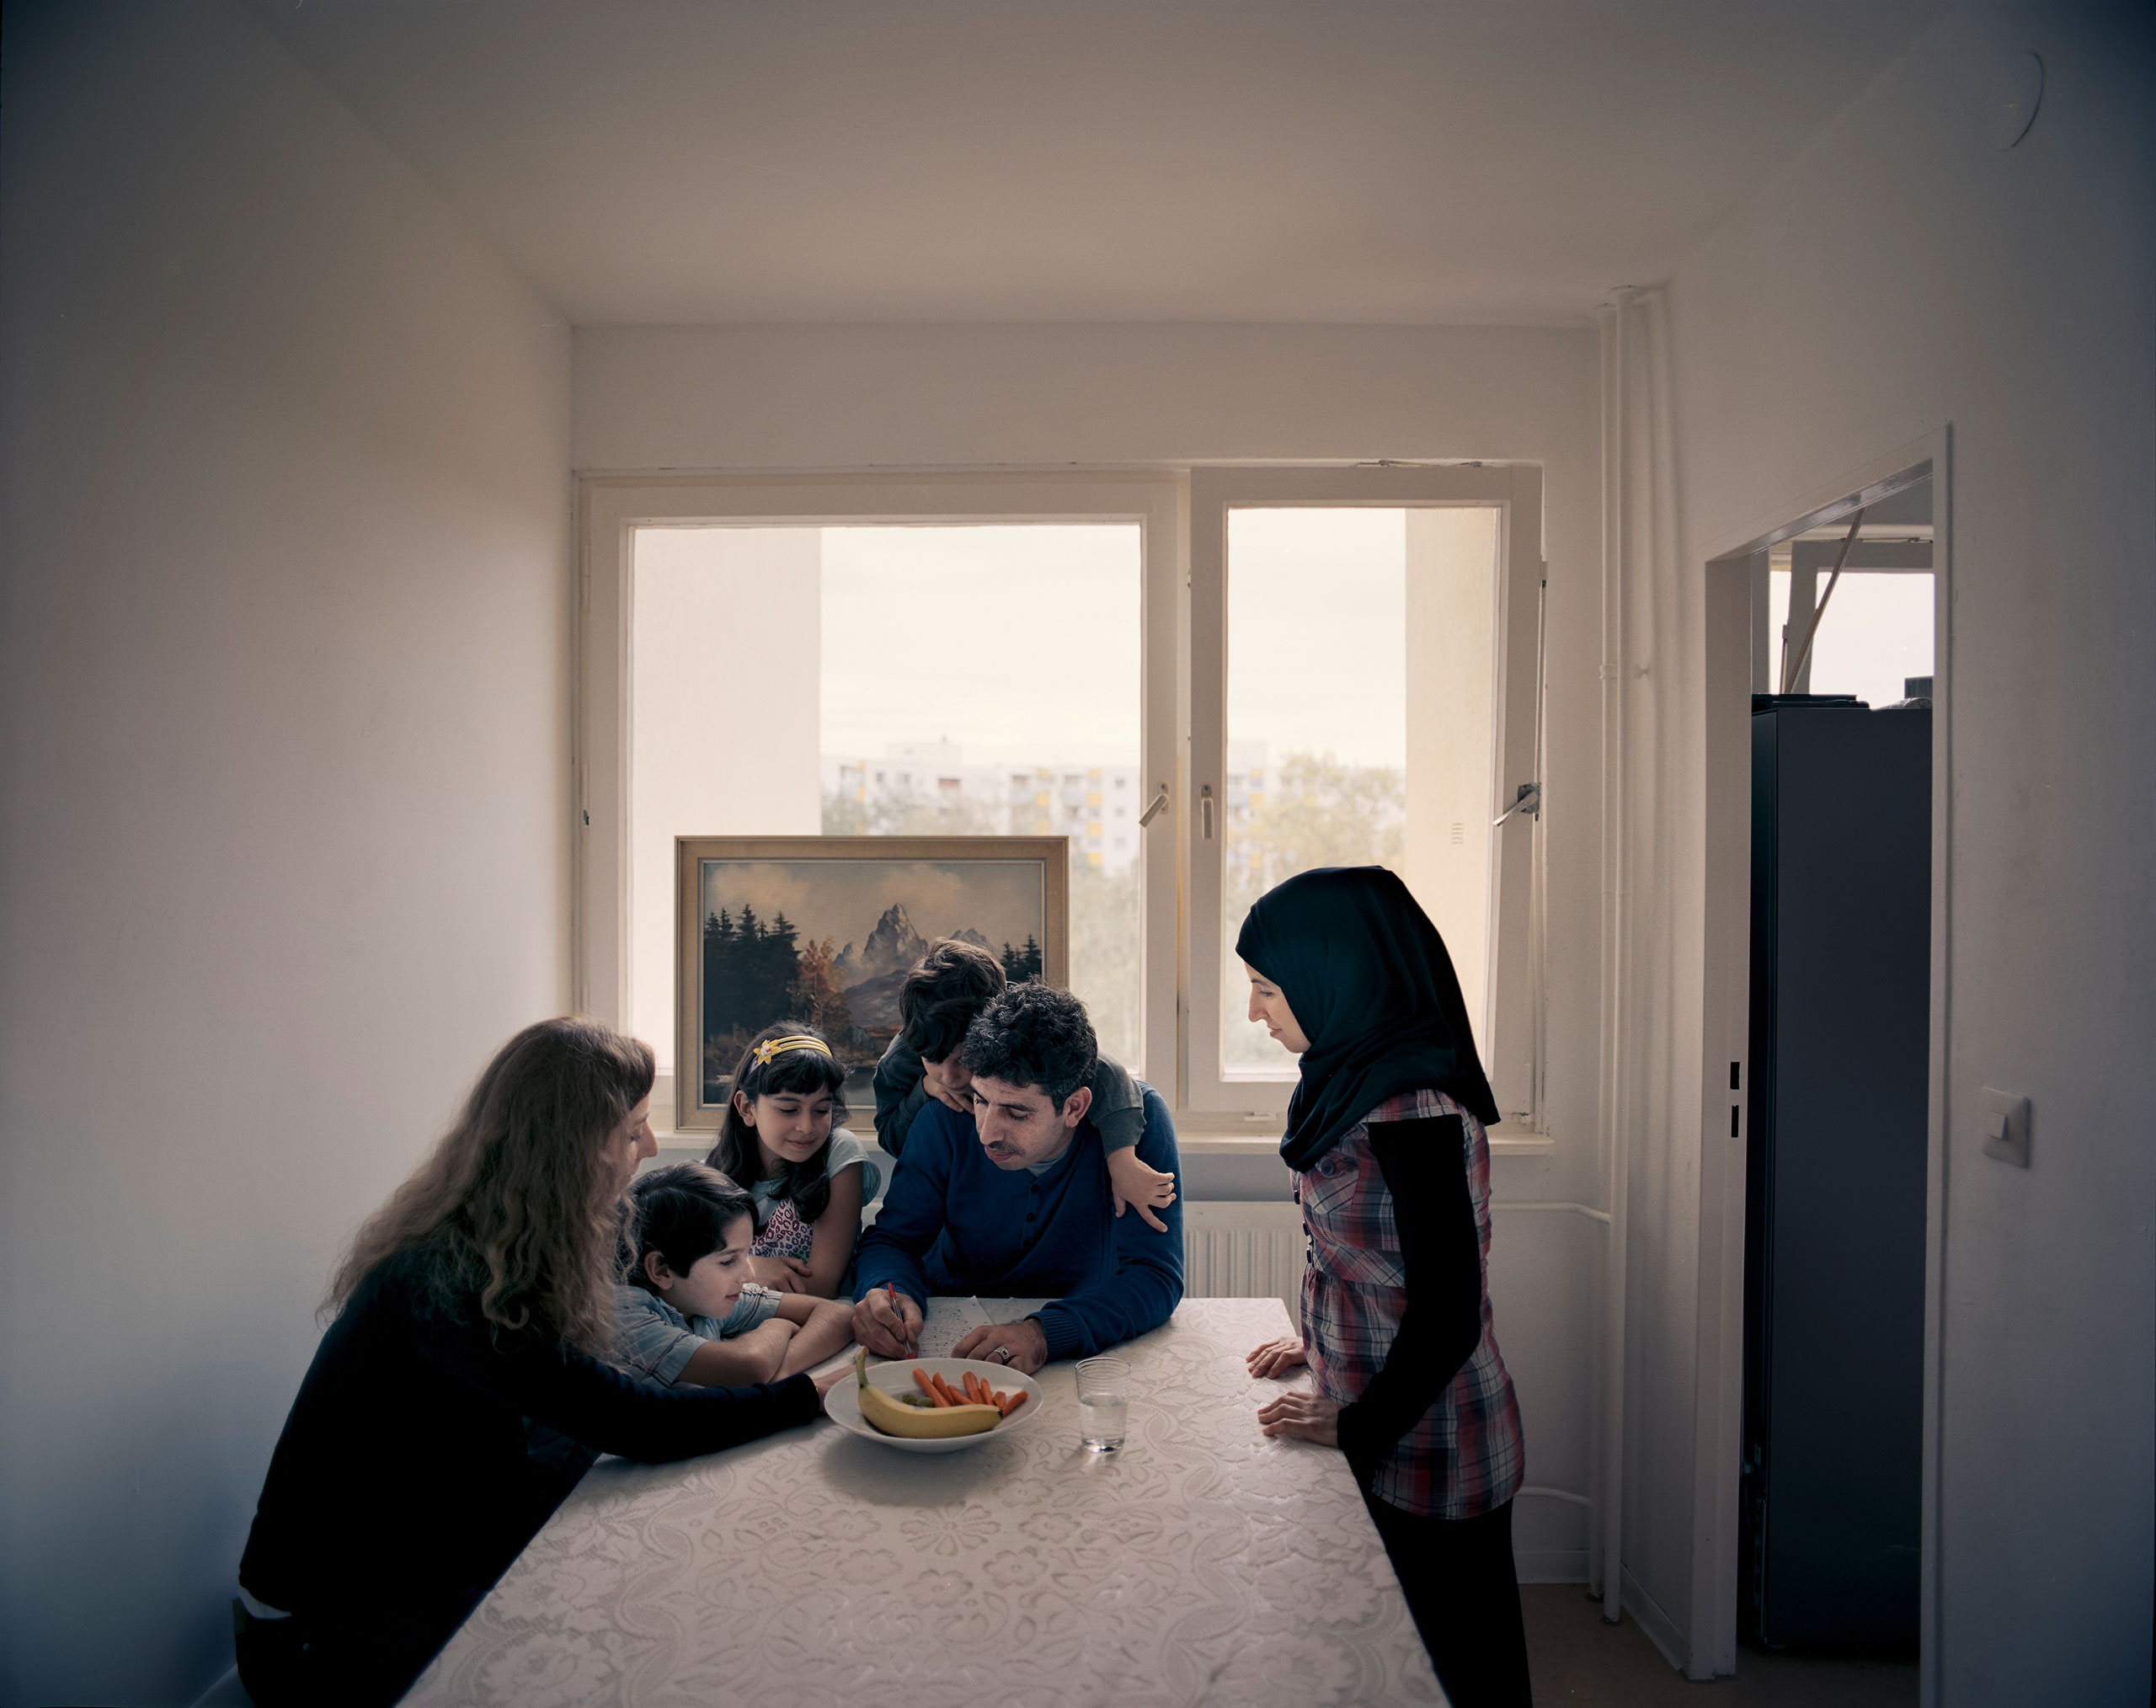 Britta Leben, left, a 27-year-old German master’s student, helps Zakaria Edelbi, 30, center, with his German-­language work. Edelbi came to Berlin in August 2014, leaving behind his wife and three children in Aleppo. He was reunited with them in March 2015 after months of trying to secure visas. Leben first met Edelbi in May, thanks to Beginn Nebenan Berlin, an organization that connects locals with refugees. “I just wanted to get to know the people we’re sharing this city with,” she says. “And Zakaria’s family is so open-­minded and fun to be around.” In late August, the Edelbis moved out of a shelter and into their own flat in Spandau, West Berlin. The children now attend school nearby and already speak some German. Edelbi says he fears for Syria’s ­future—but for the first time, he is no longer afraid for his children.From   The Welcome.  October 19, 2015 issue.